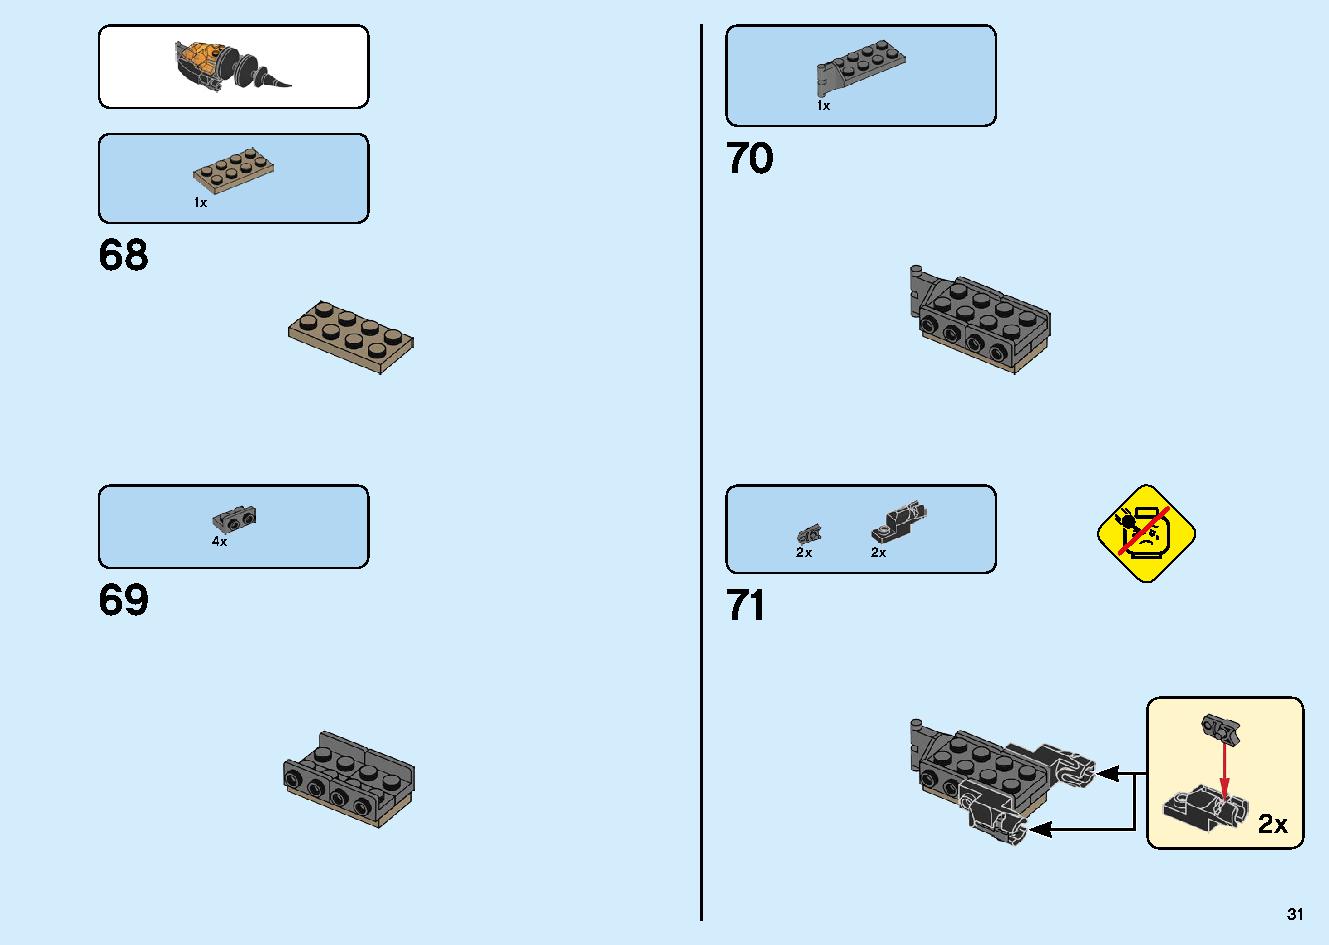 Fire Fang 70674 LEGO information LEGO instructions 31 page